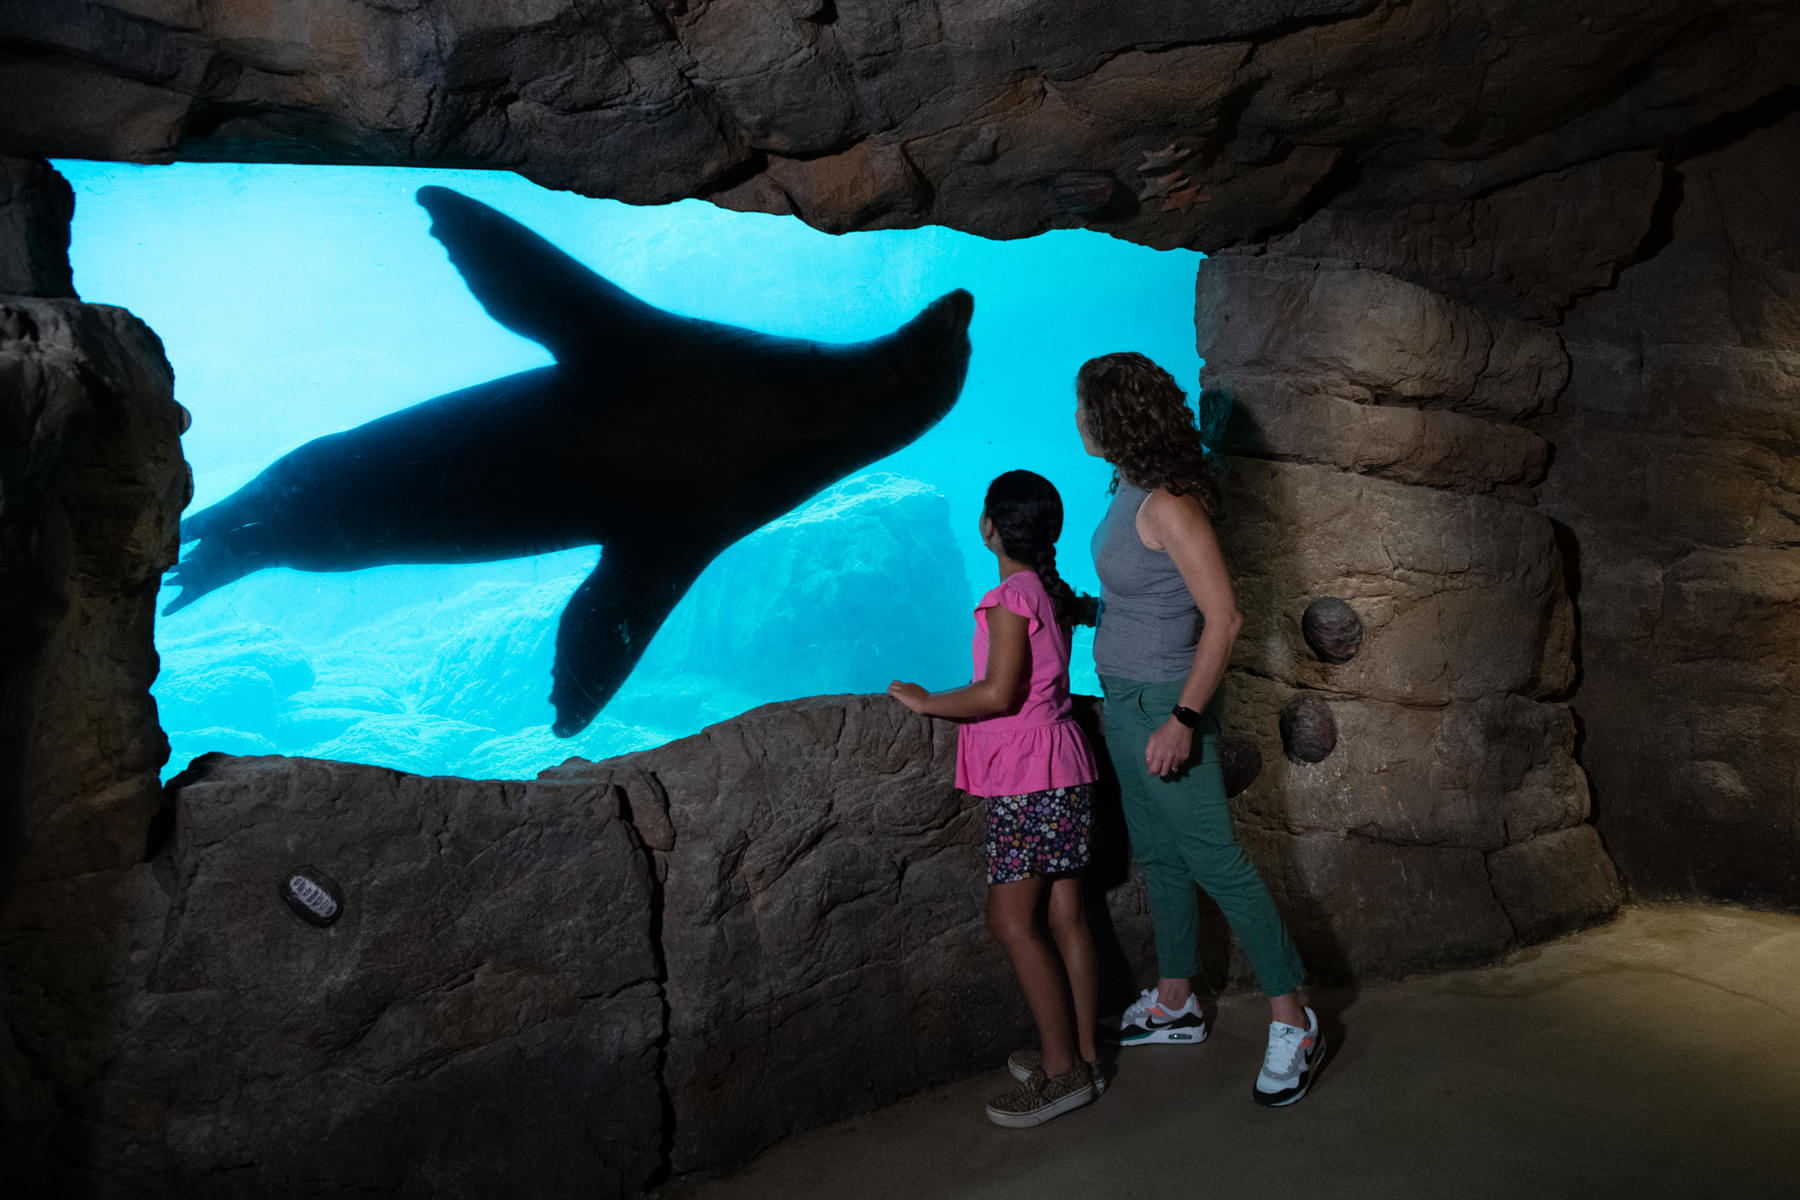 Join your littles ones in the journey of exploring New York Aquarium